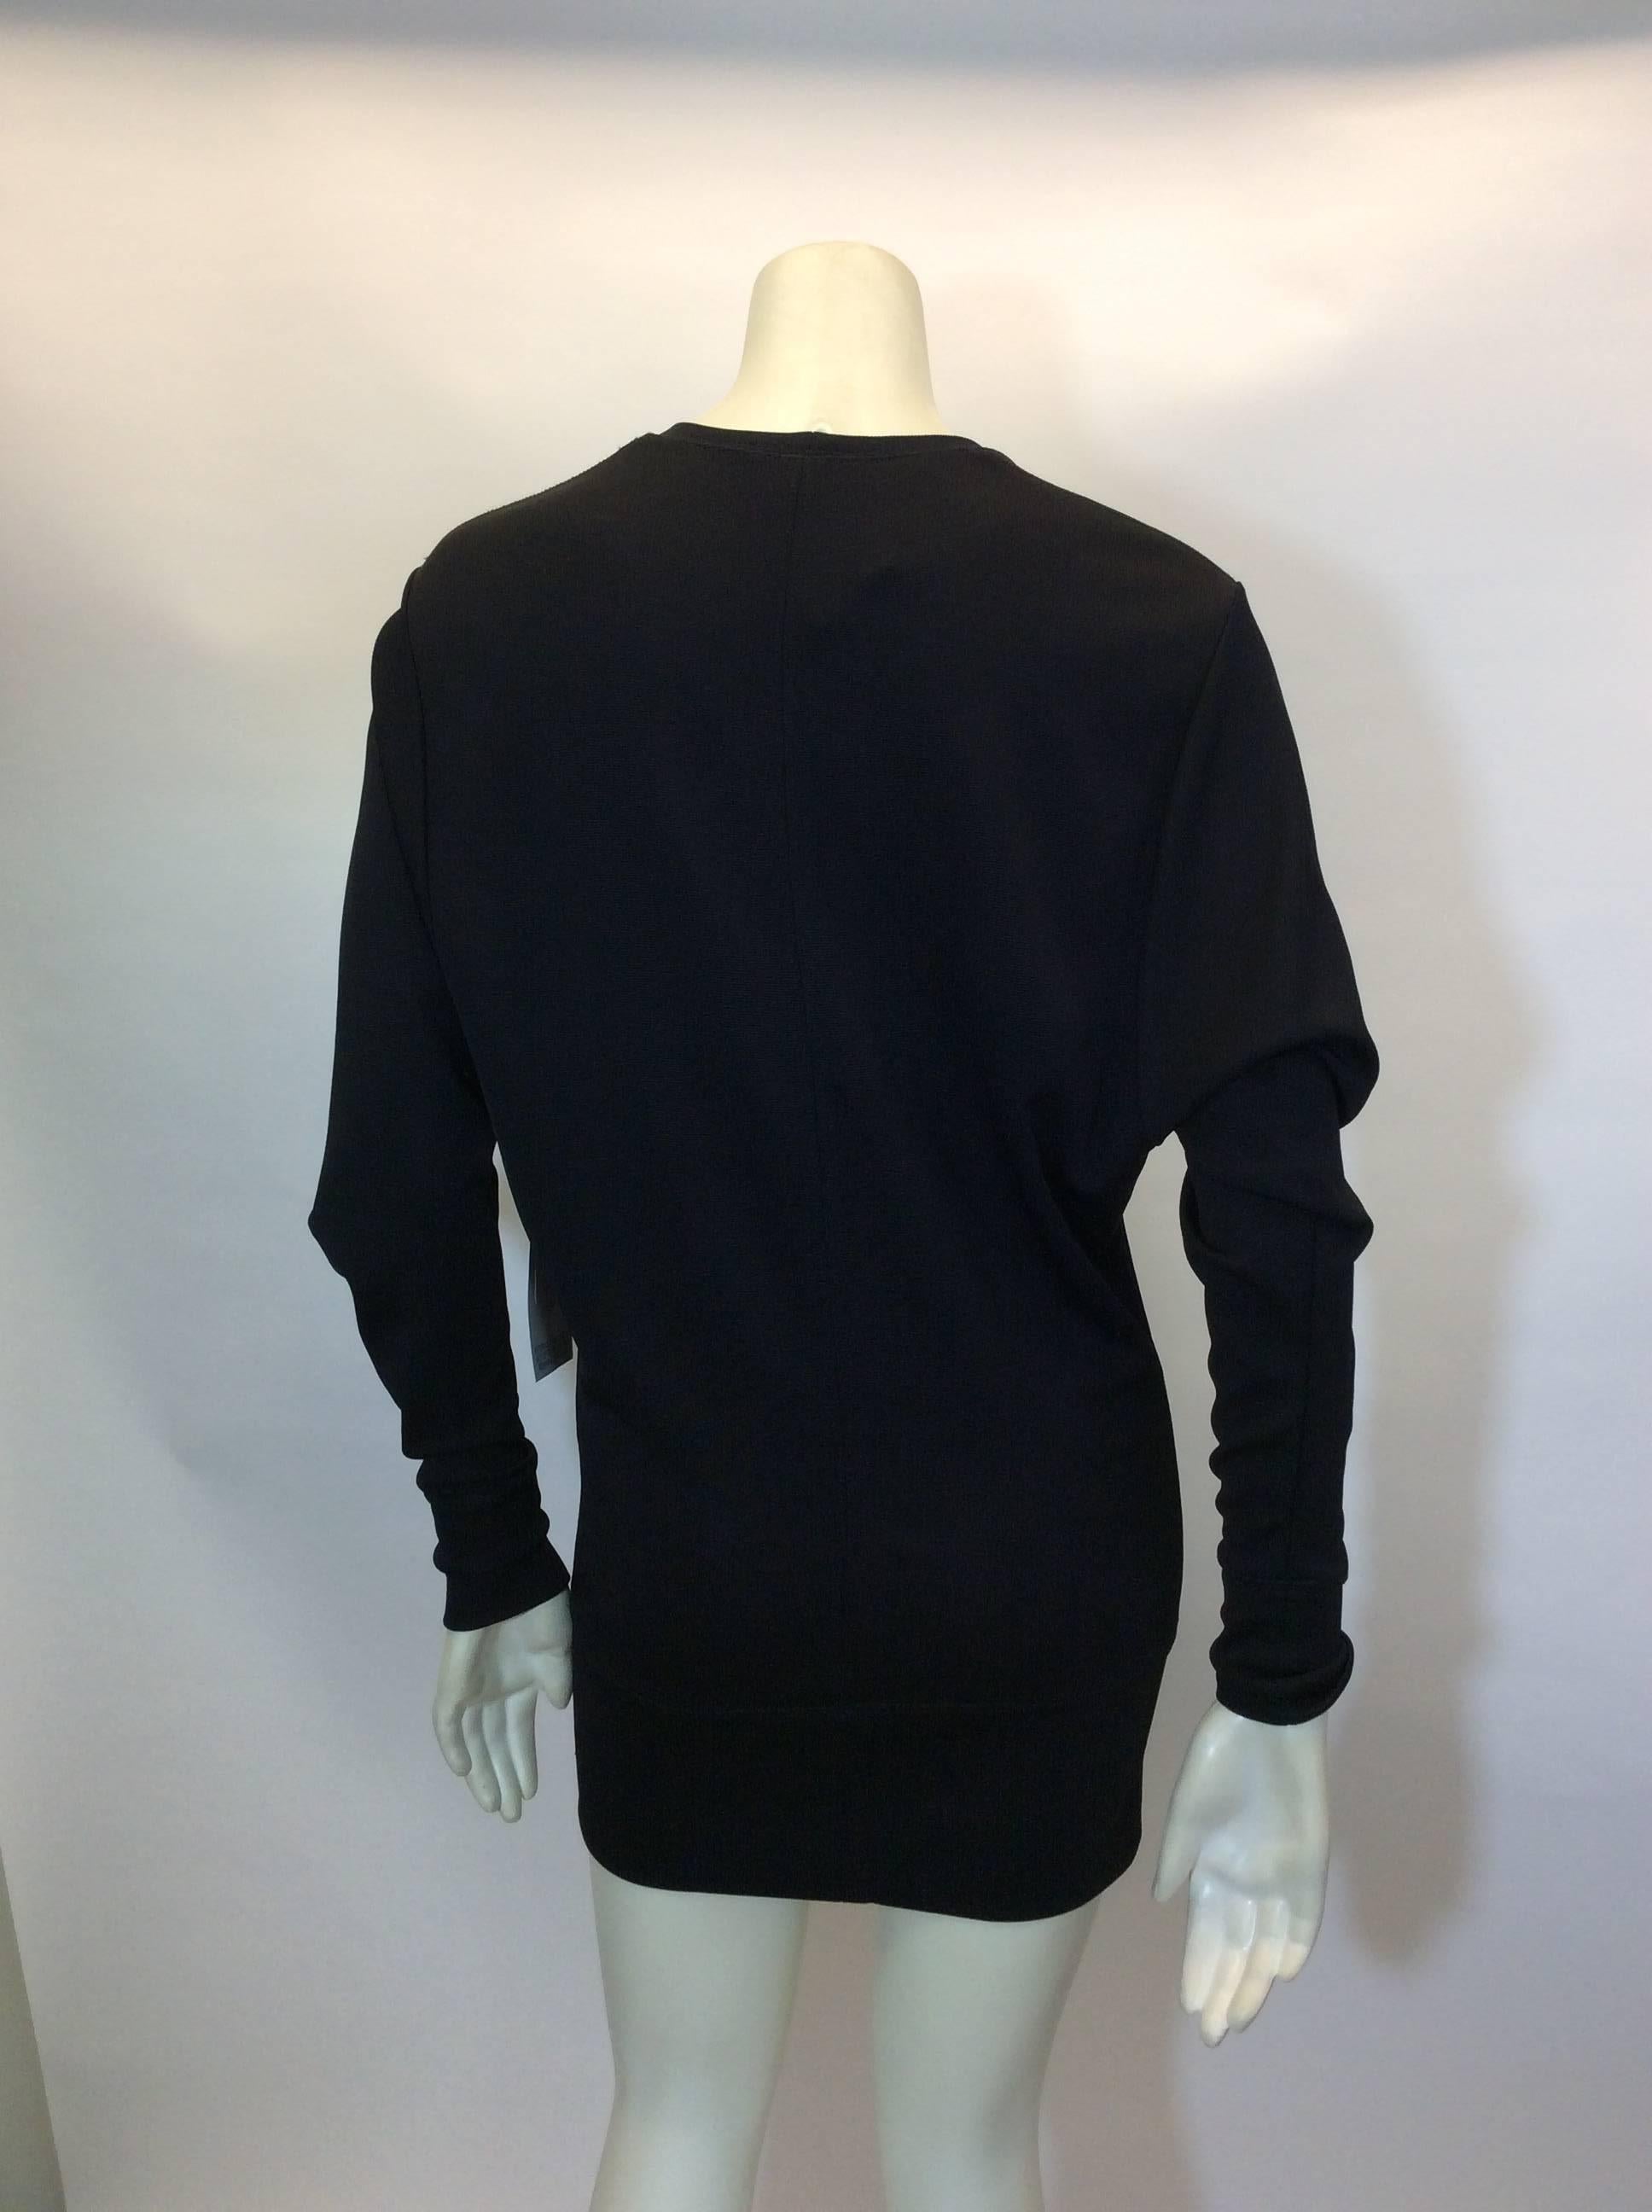 Helmut Lang Black Long Sleeve NWT Dress In New Condition For Sale In Narberth, PA